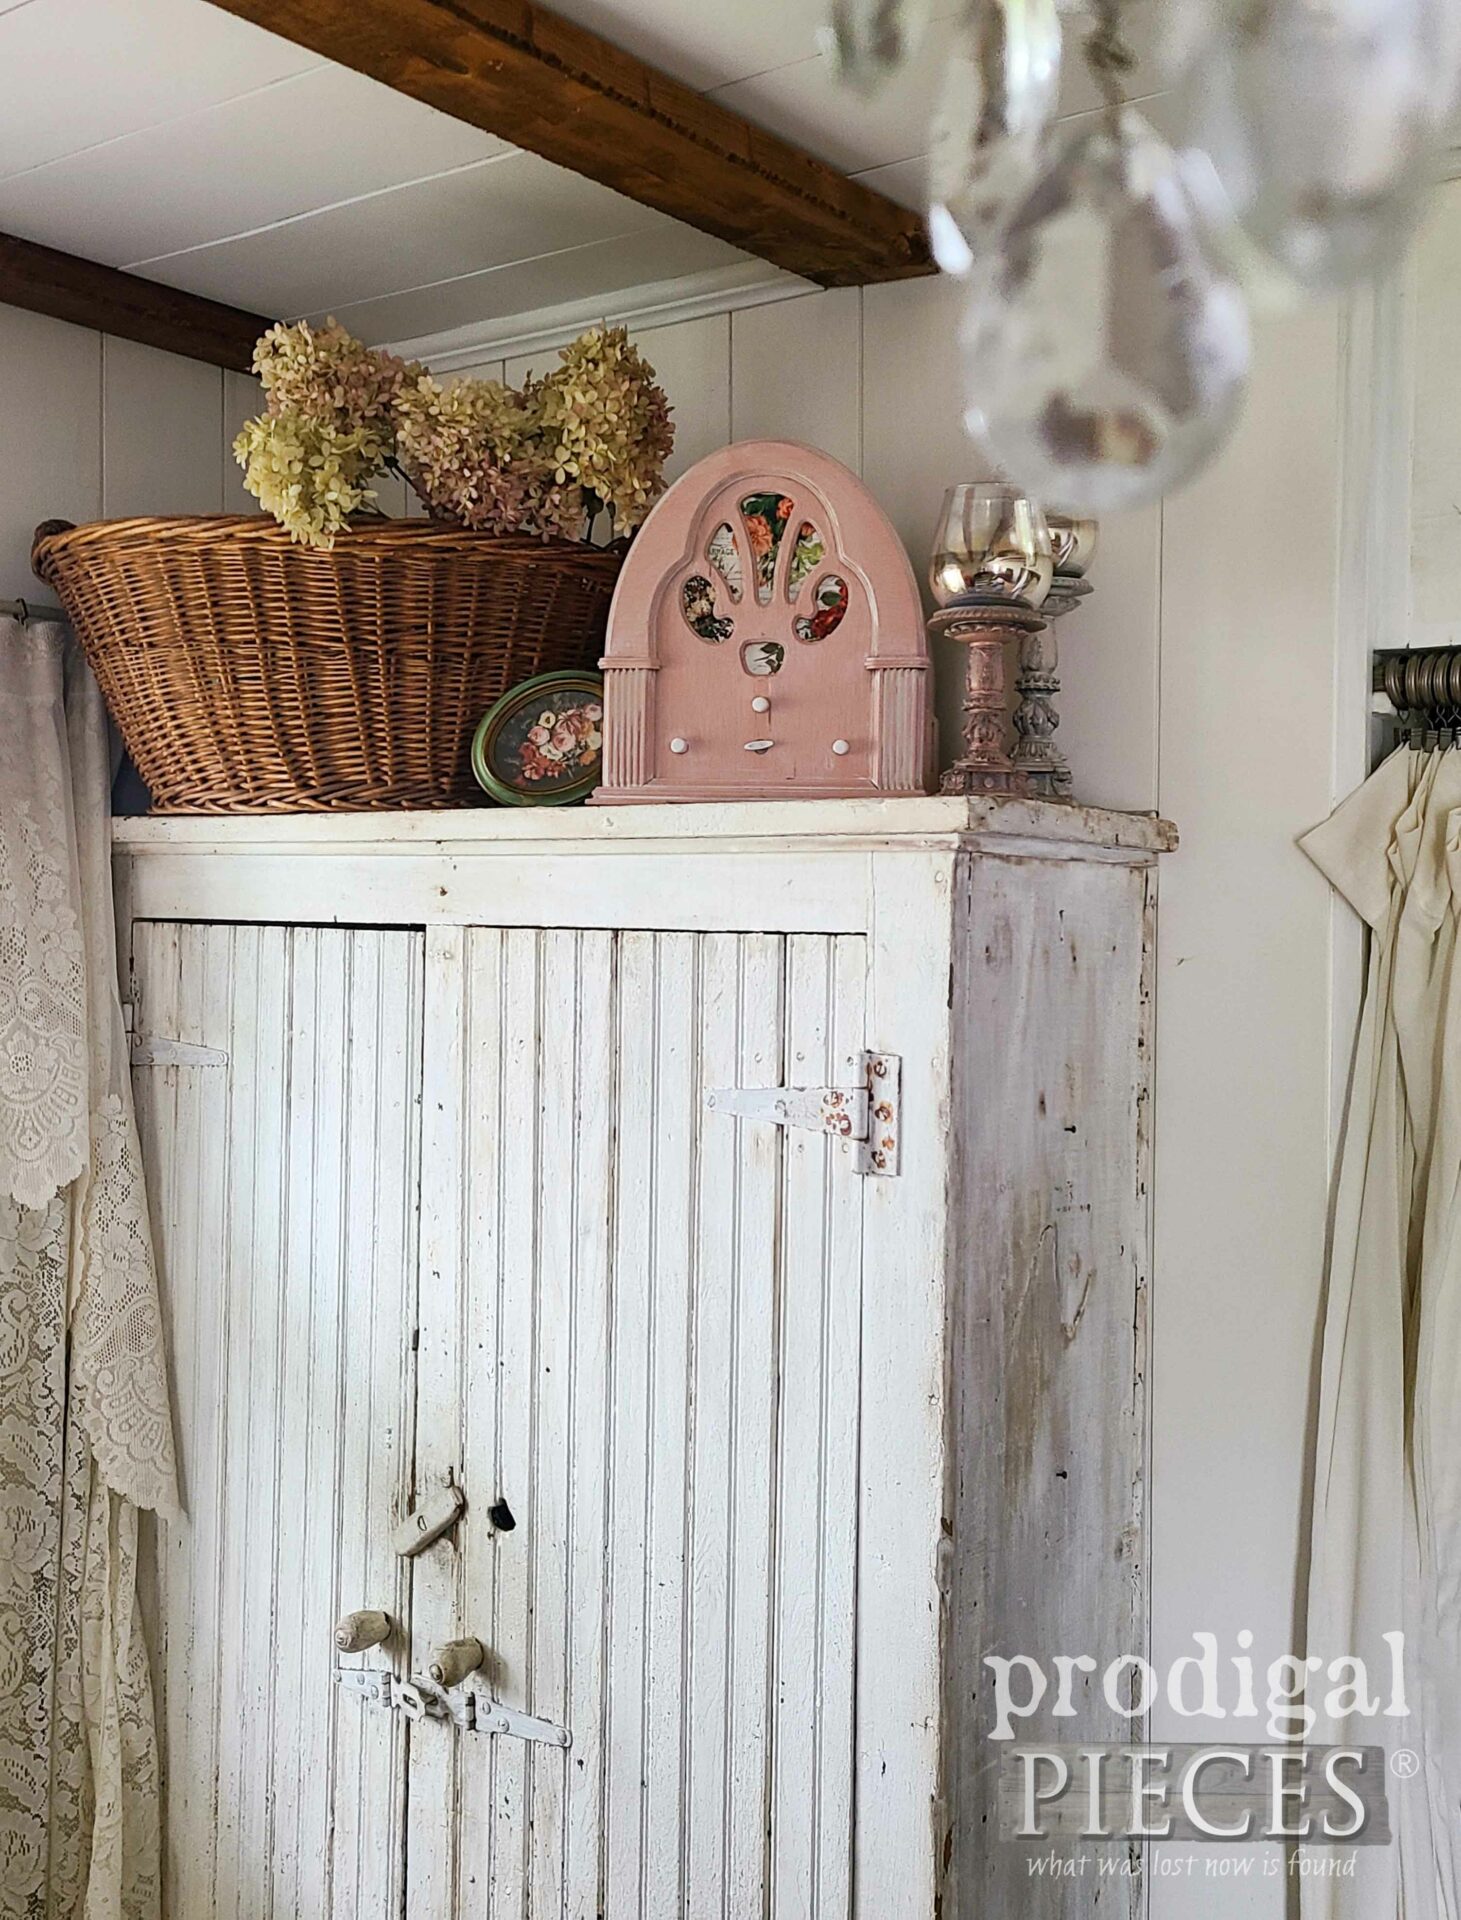 Farmhouse Bedroom with Upcycled Antique Radio Music Box Light by Larissa of Prodigal Pieces | prodigalpieces.com #prodigalpieces #handmade #farmhouse